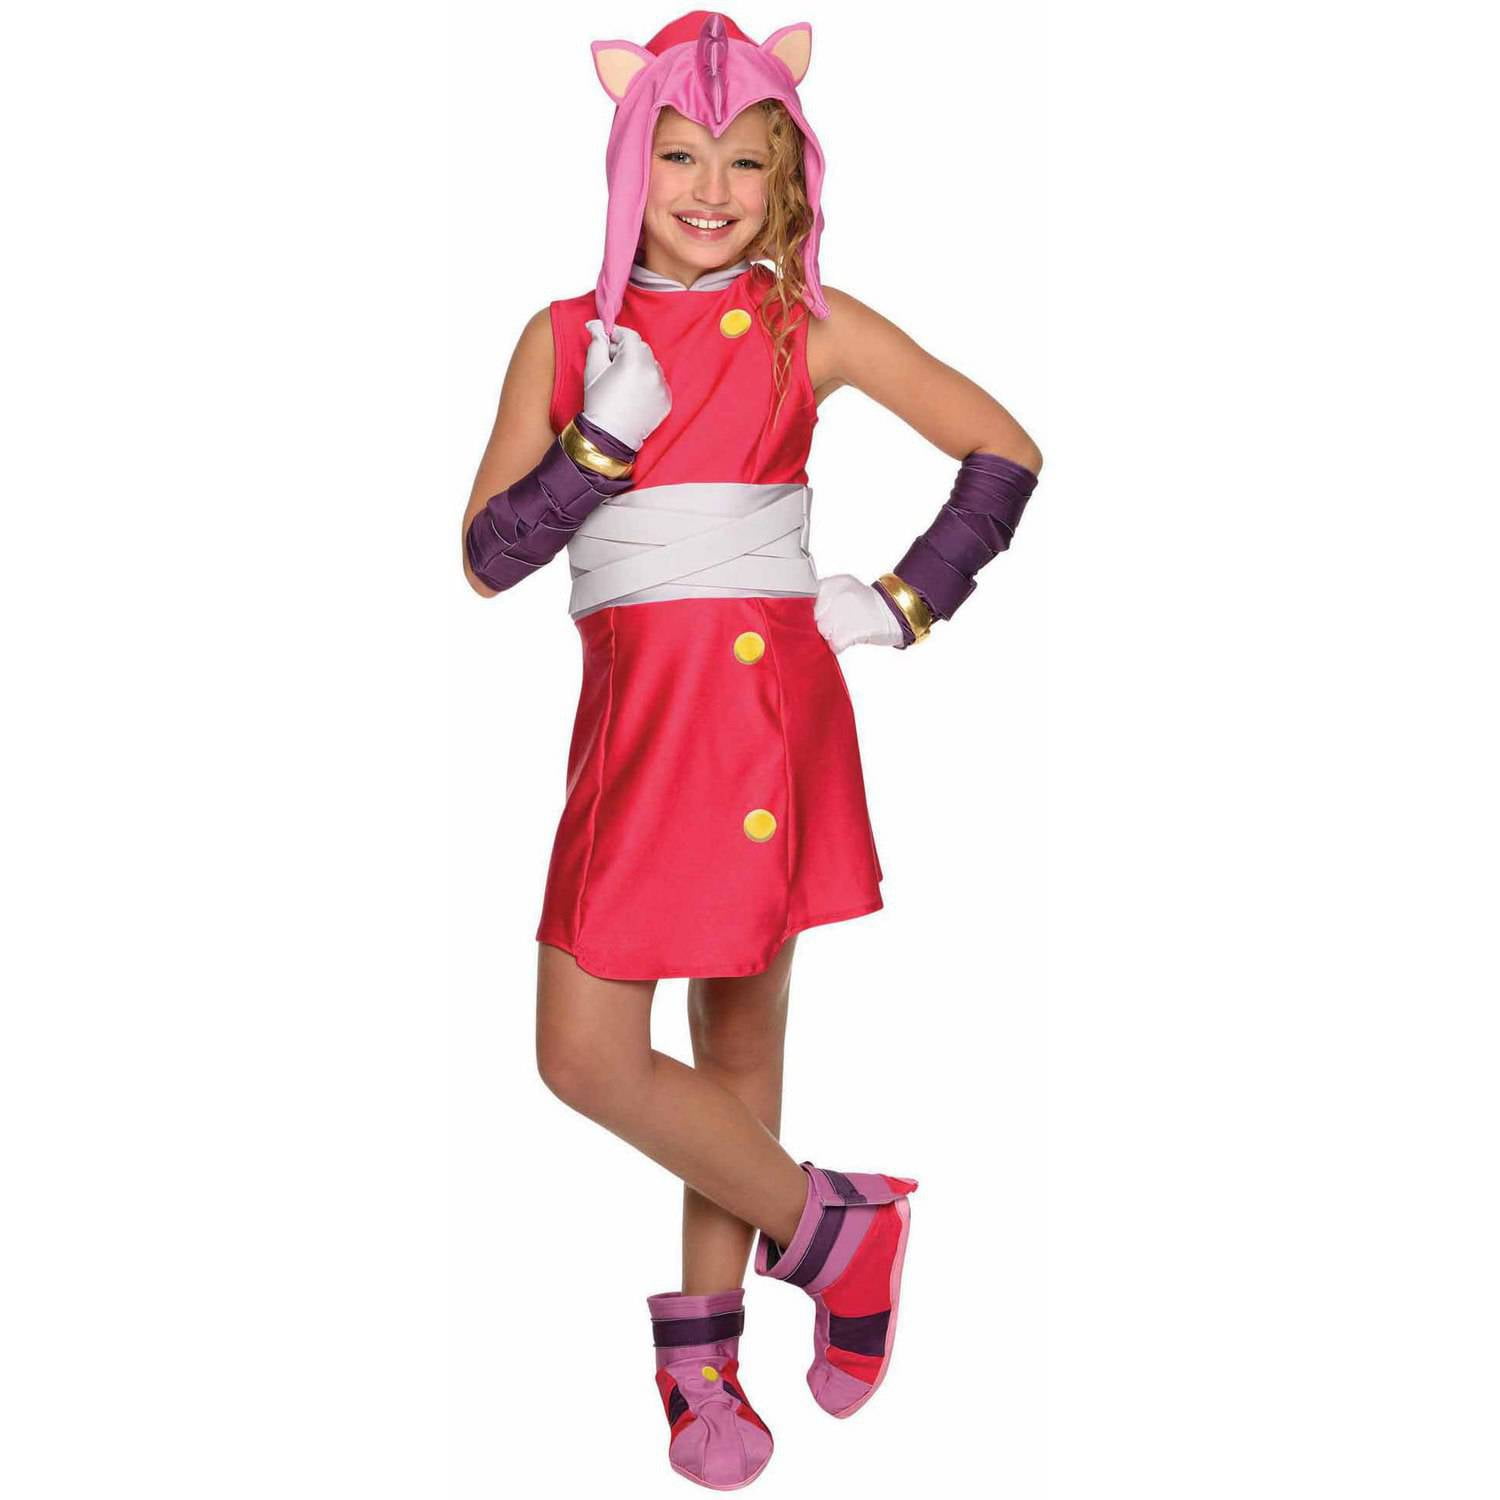 Sonic the Hedgehog Amy Rose Cosplay Costume.